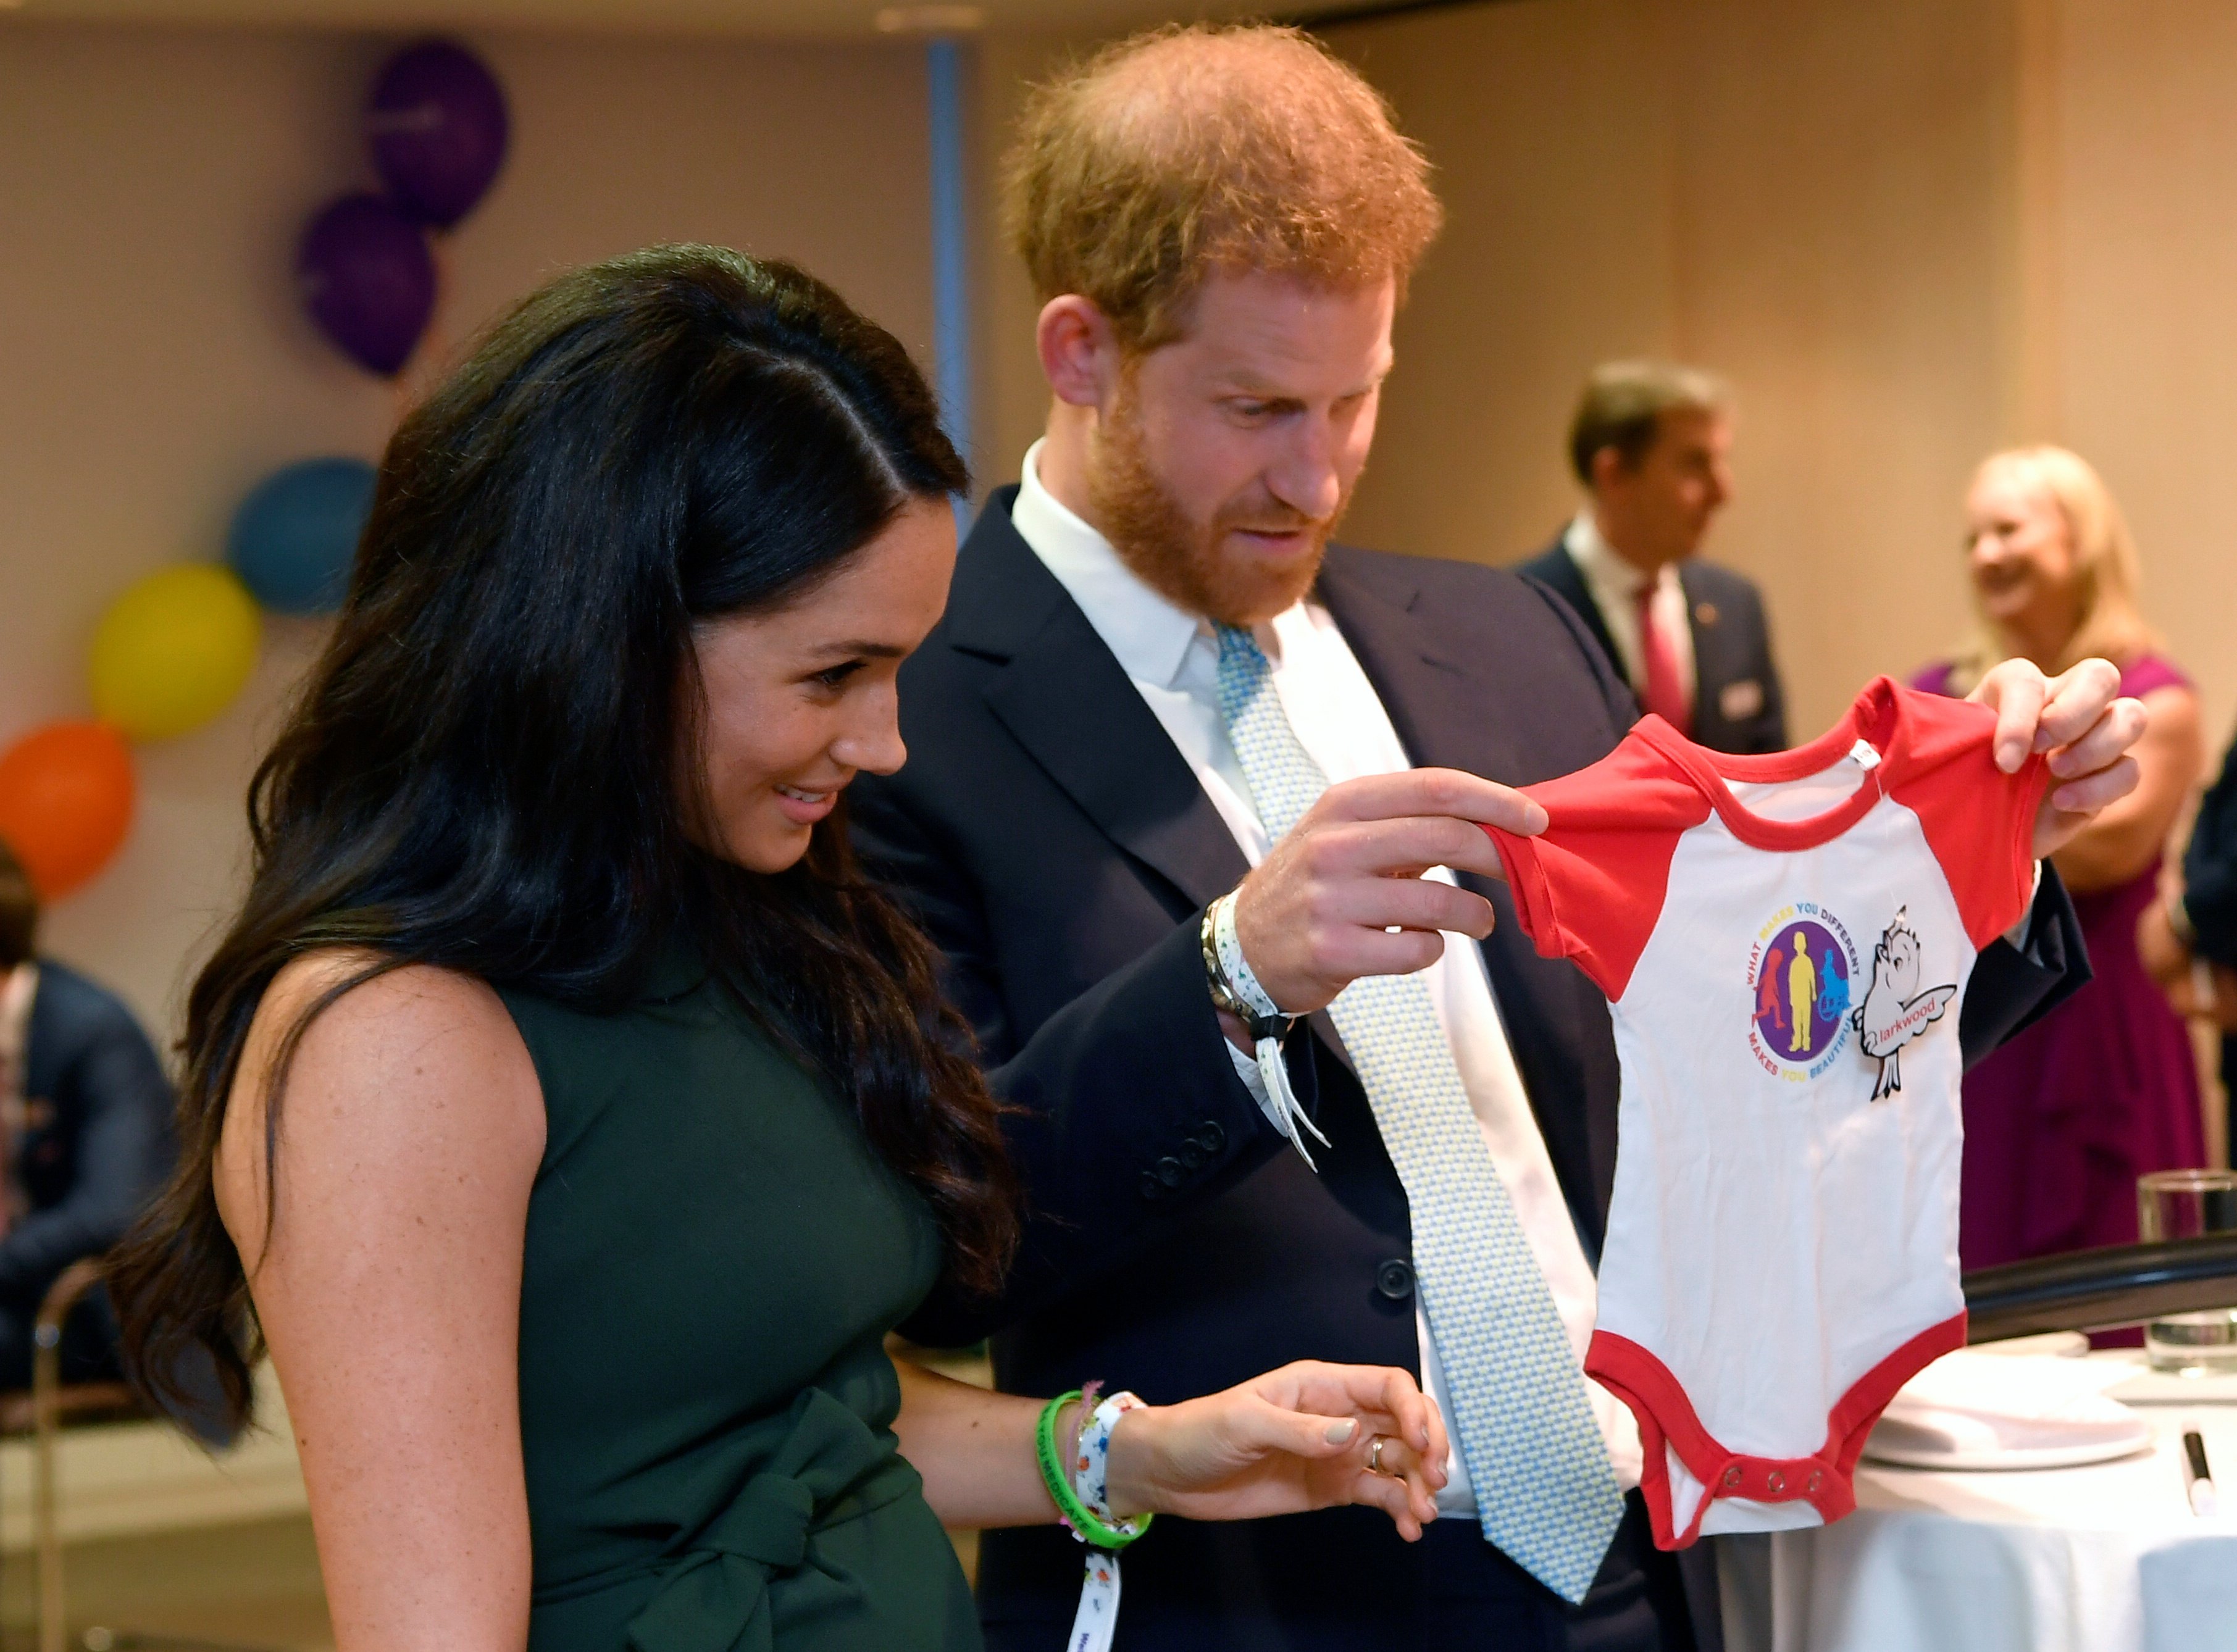 The Duke and Duchess of Sussex receive a gift for Archie at "The Child Awards" in London, October, 2015. | Photo: Getty Images.